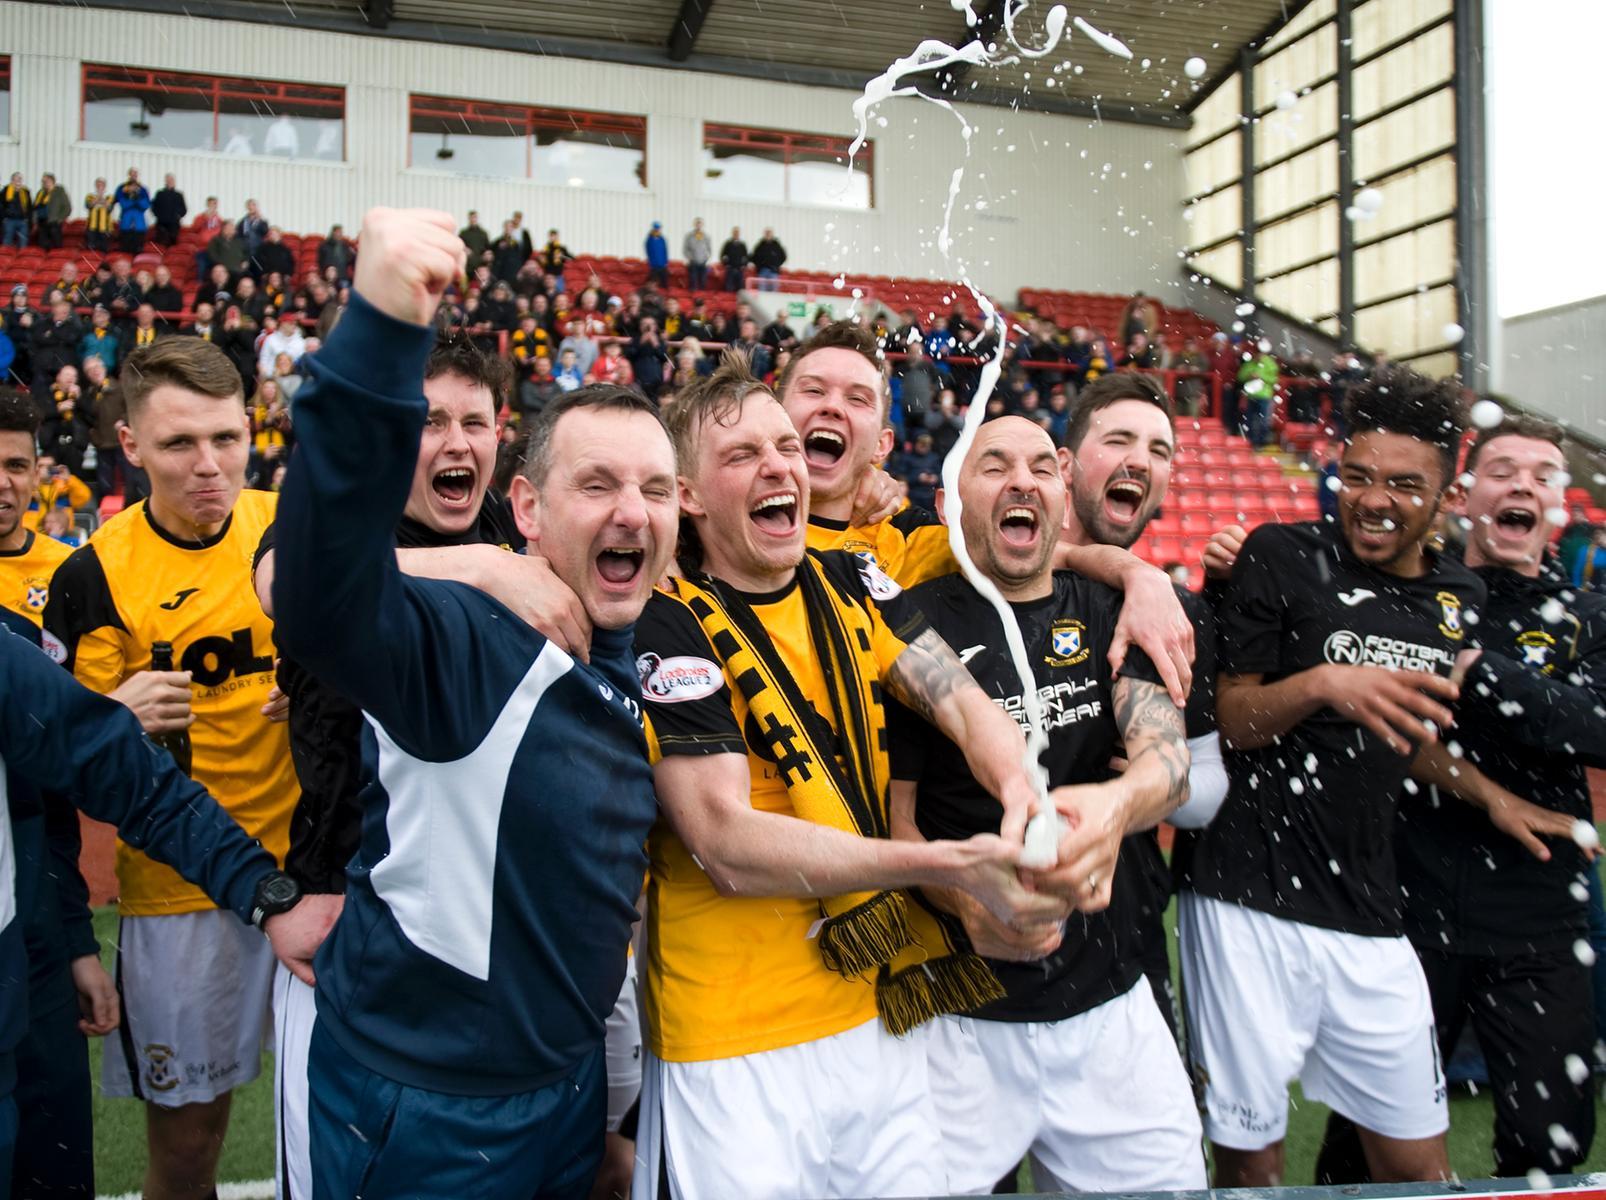 In 2016 East Fife were confirmed as Scottish League Two champions after a 0-0 draw at Clyde.